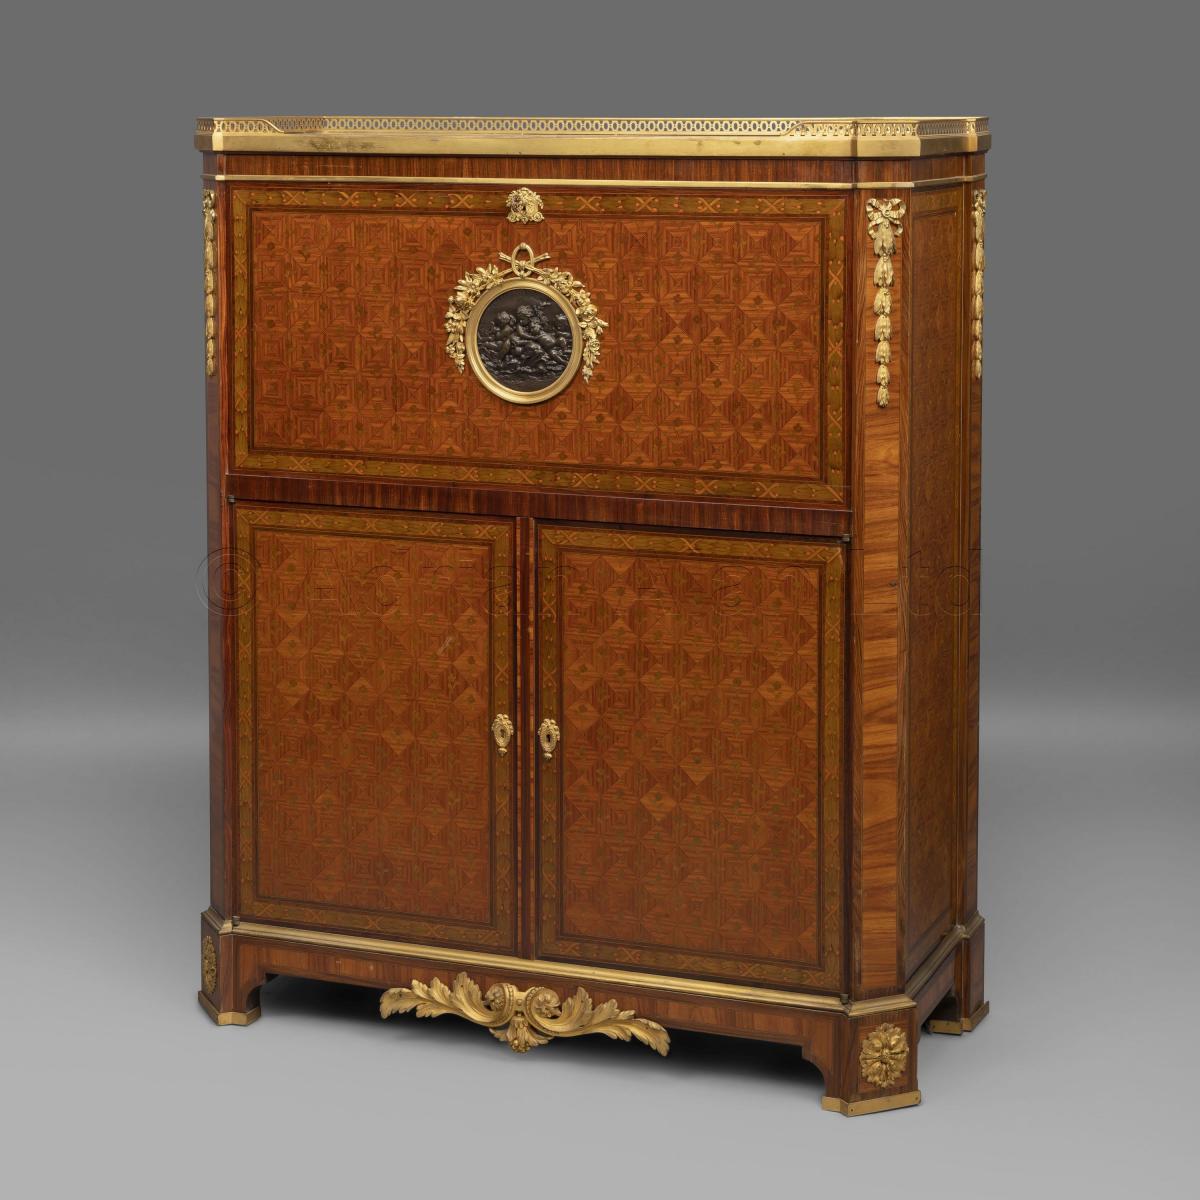 A Louis XVI Style Parquetry and Marquetry Fall-Front Secrétaire ©AdrianAlanLtd